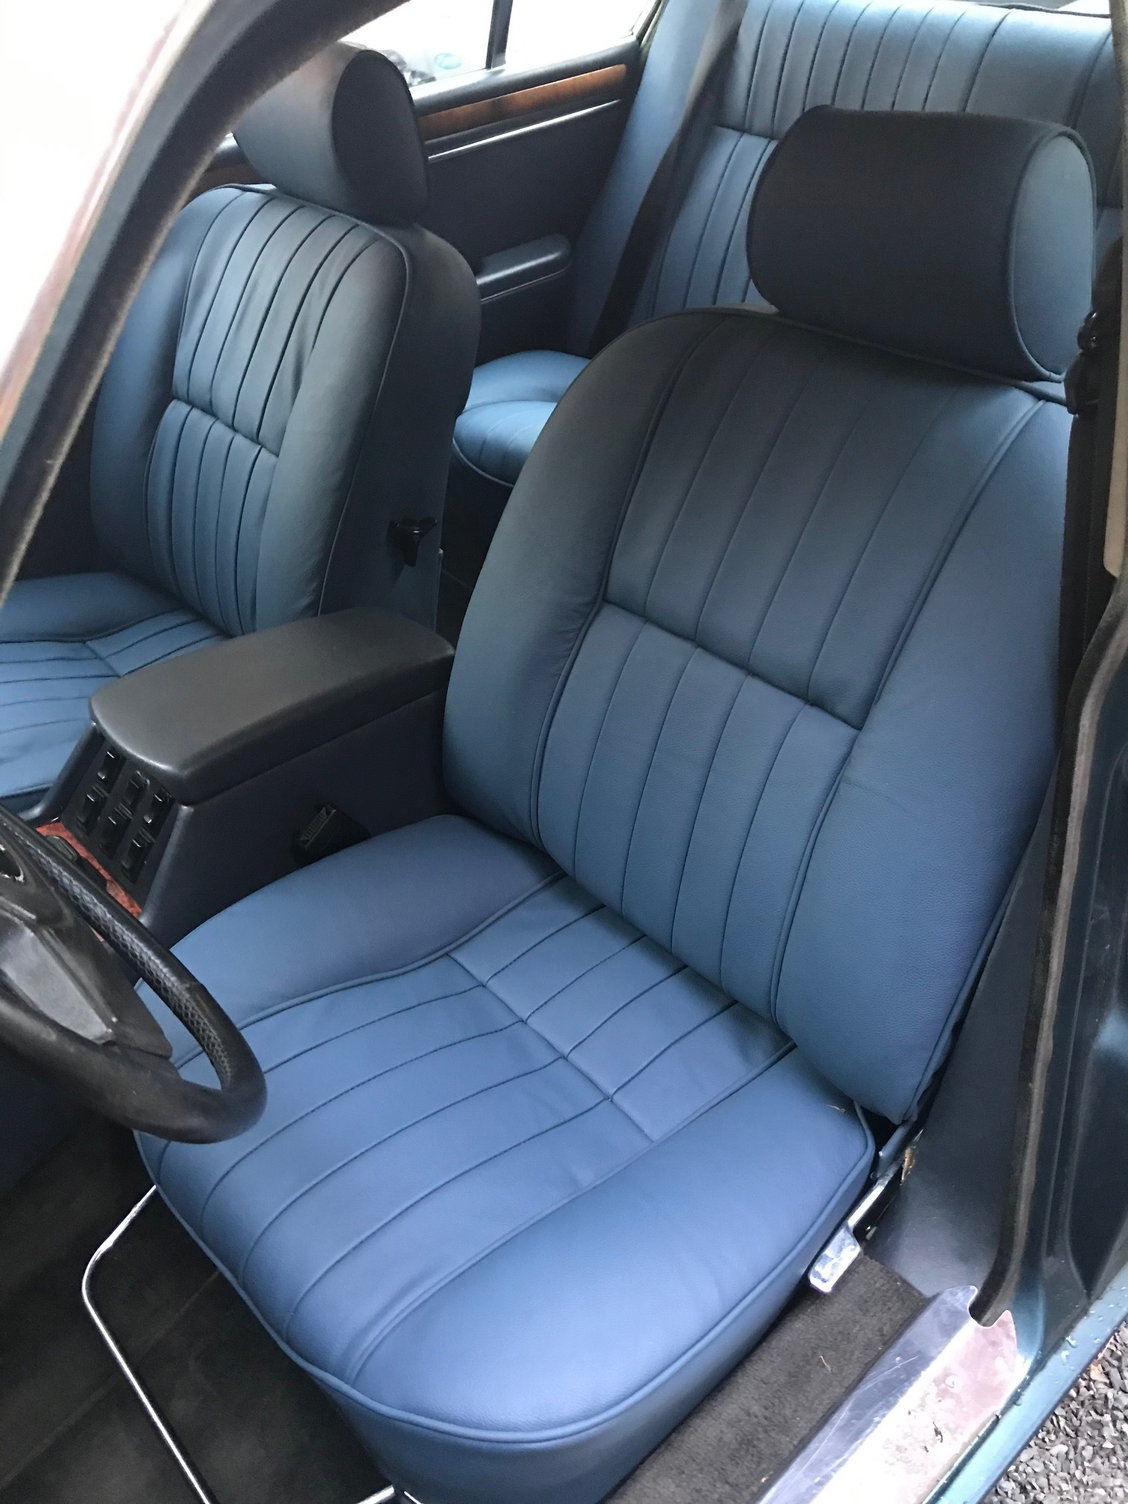 Reupholstering seats using kit from Lseat - Here's my review - Jaguar  Forums - Jaguar Enthusiasts Forum